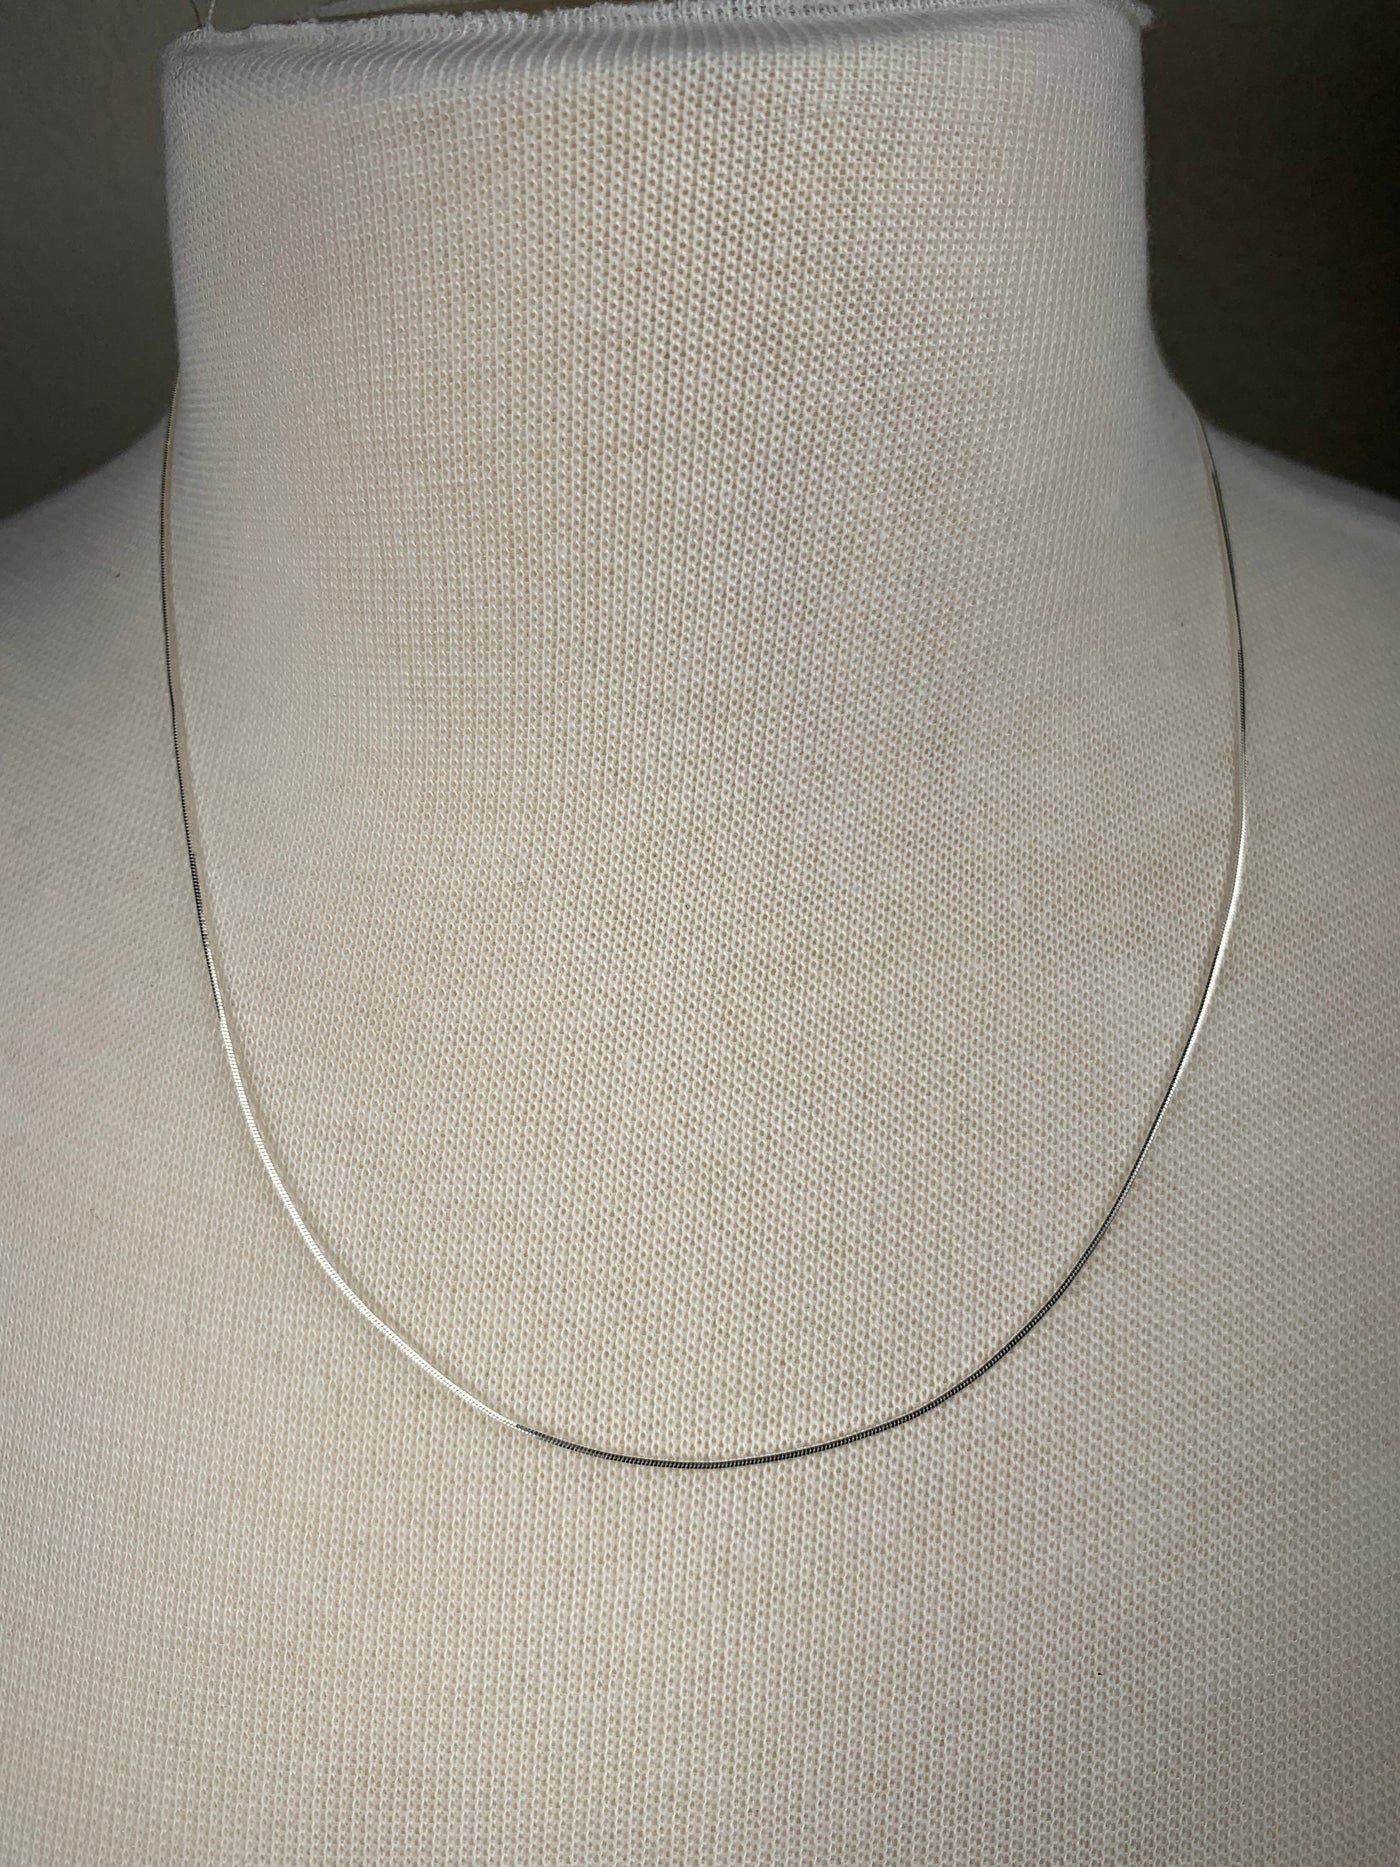 Sterling Silver 1mm Square Snake Chain